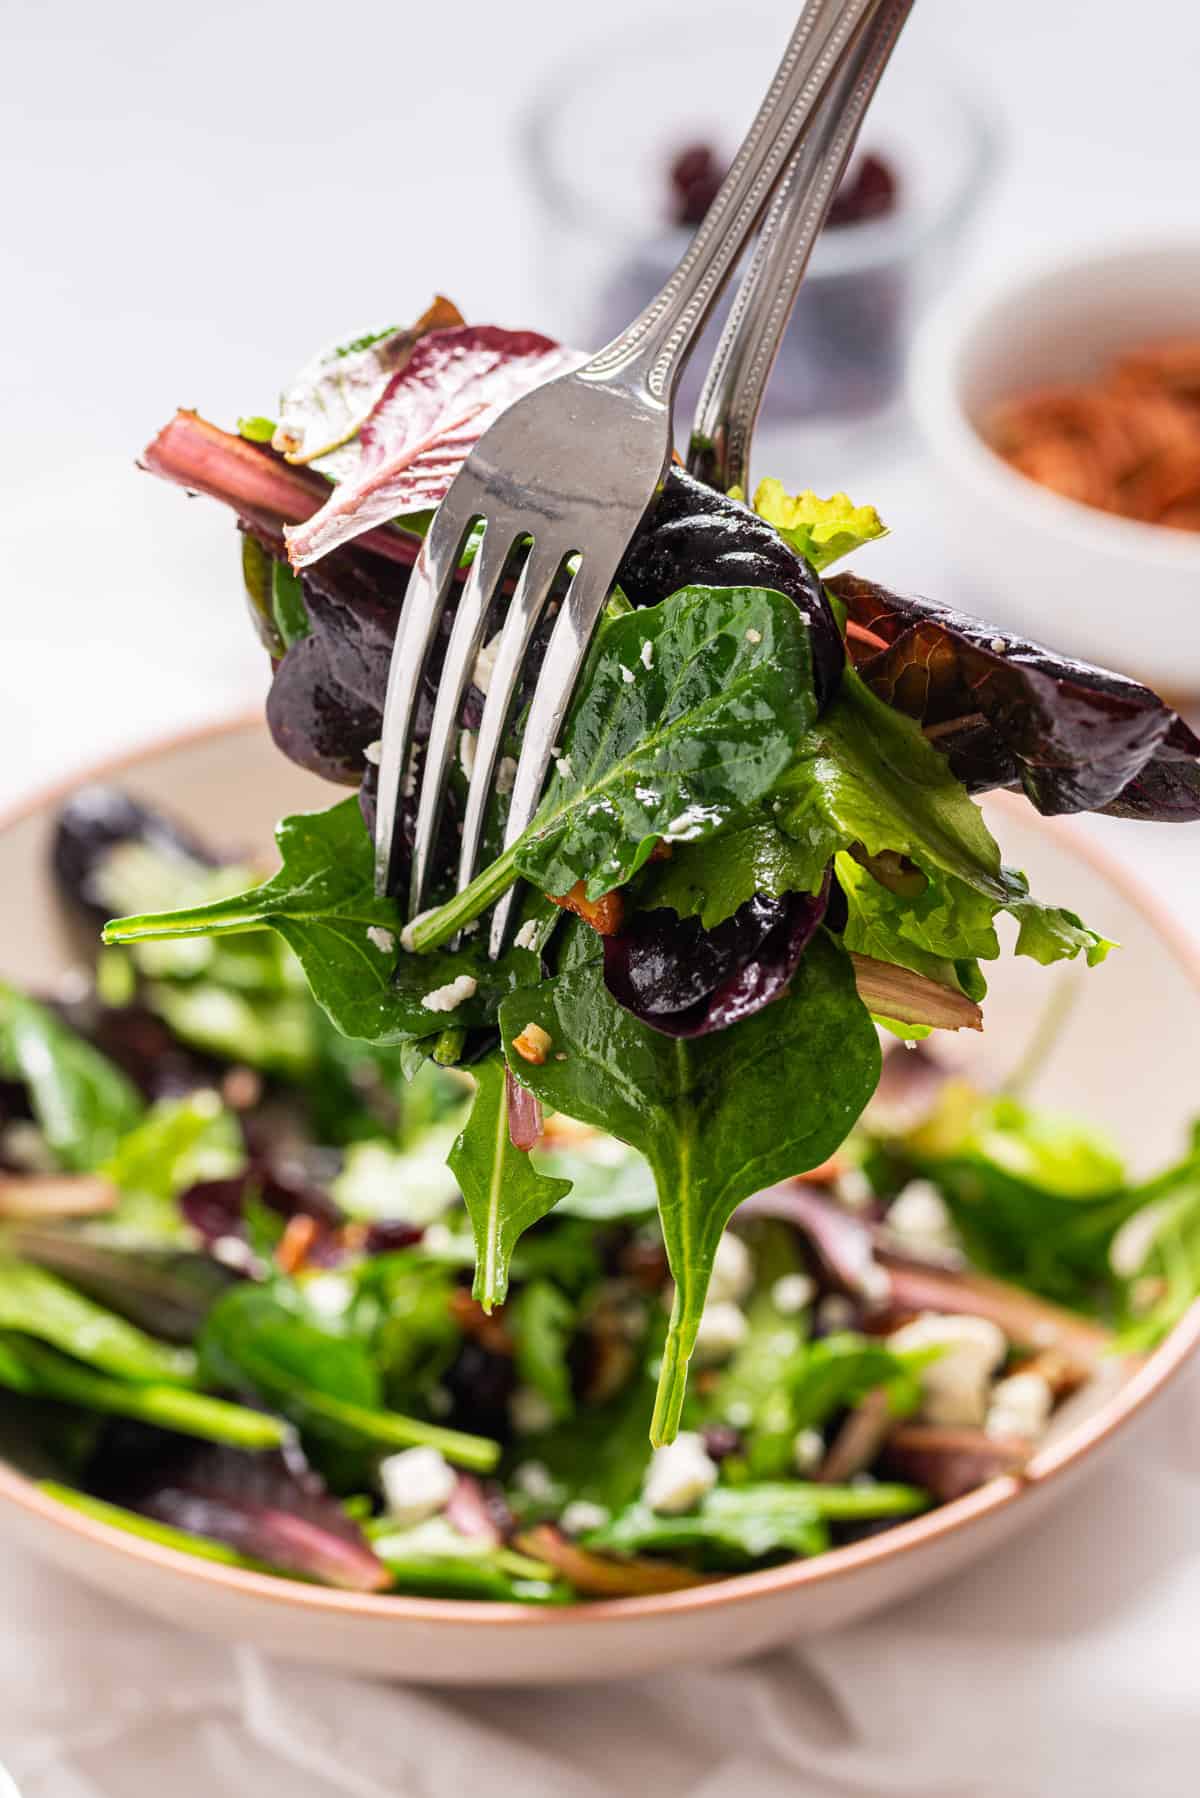 An image of a fork scooping out the cranberry salad.